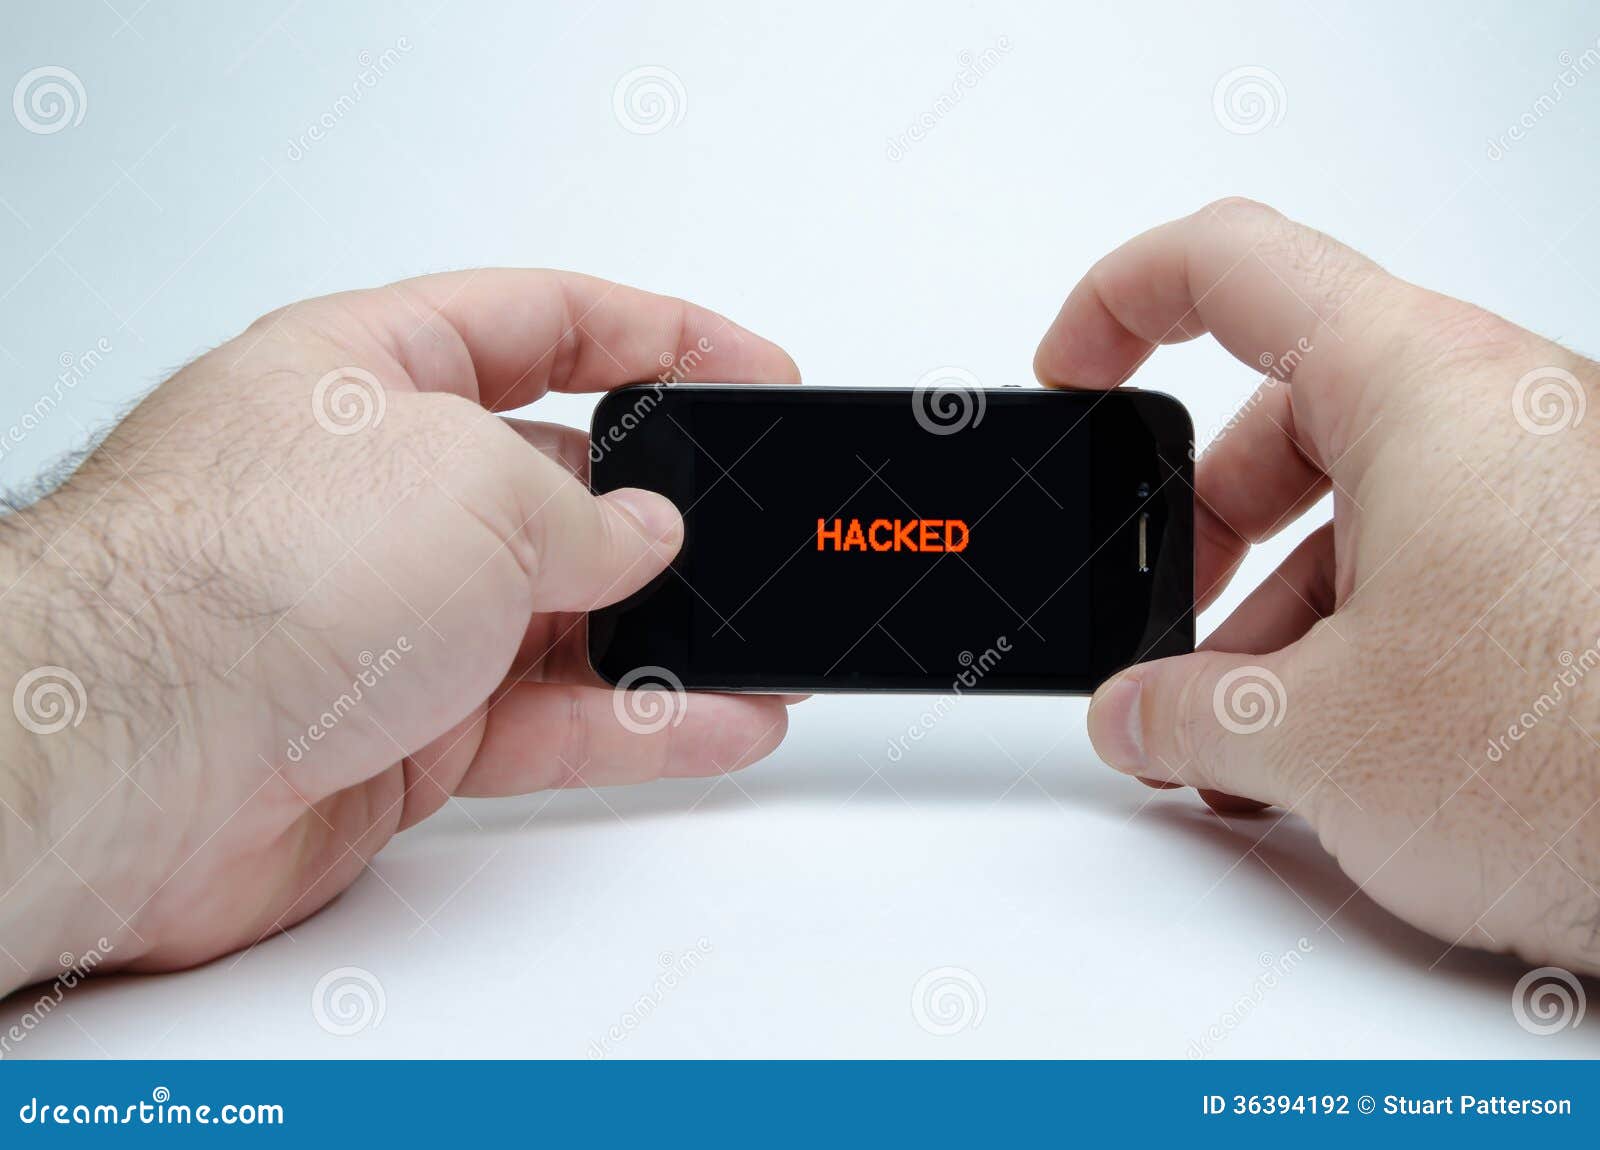 Hacked Teen Cell Phone